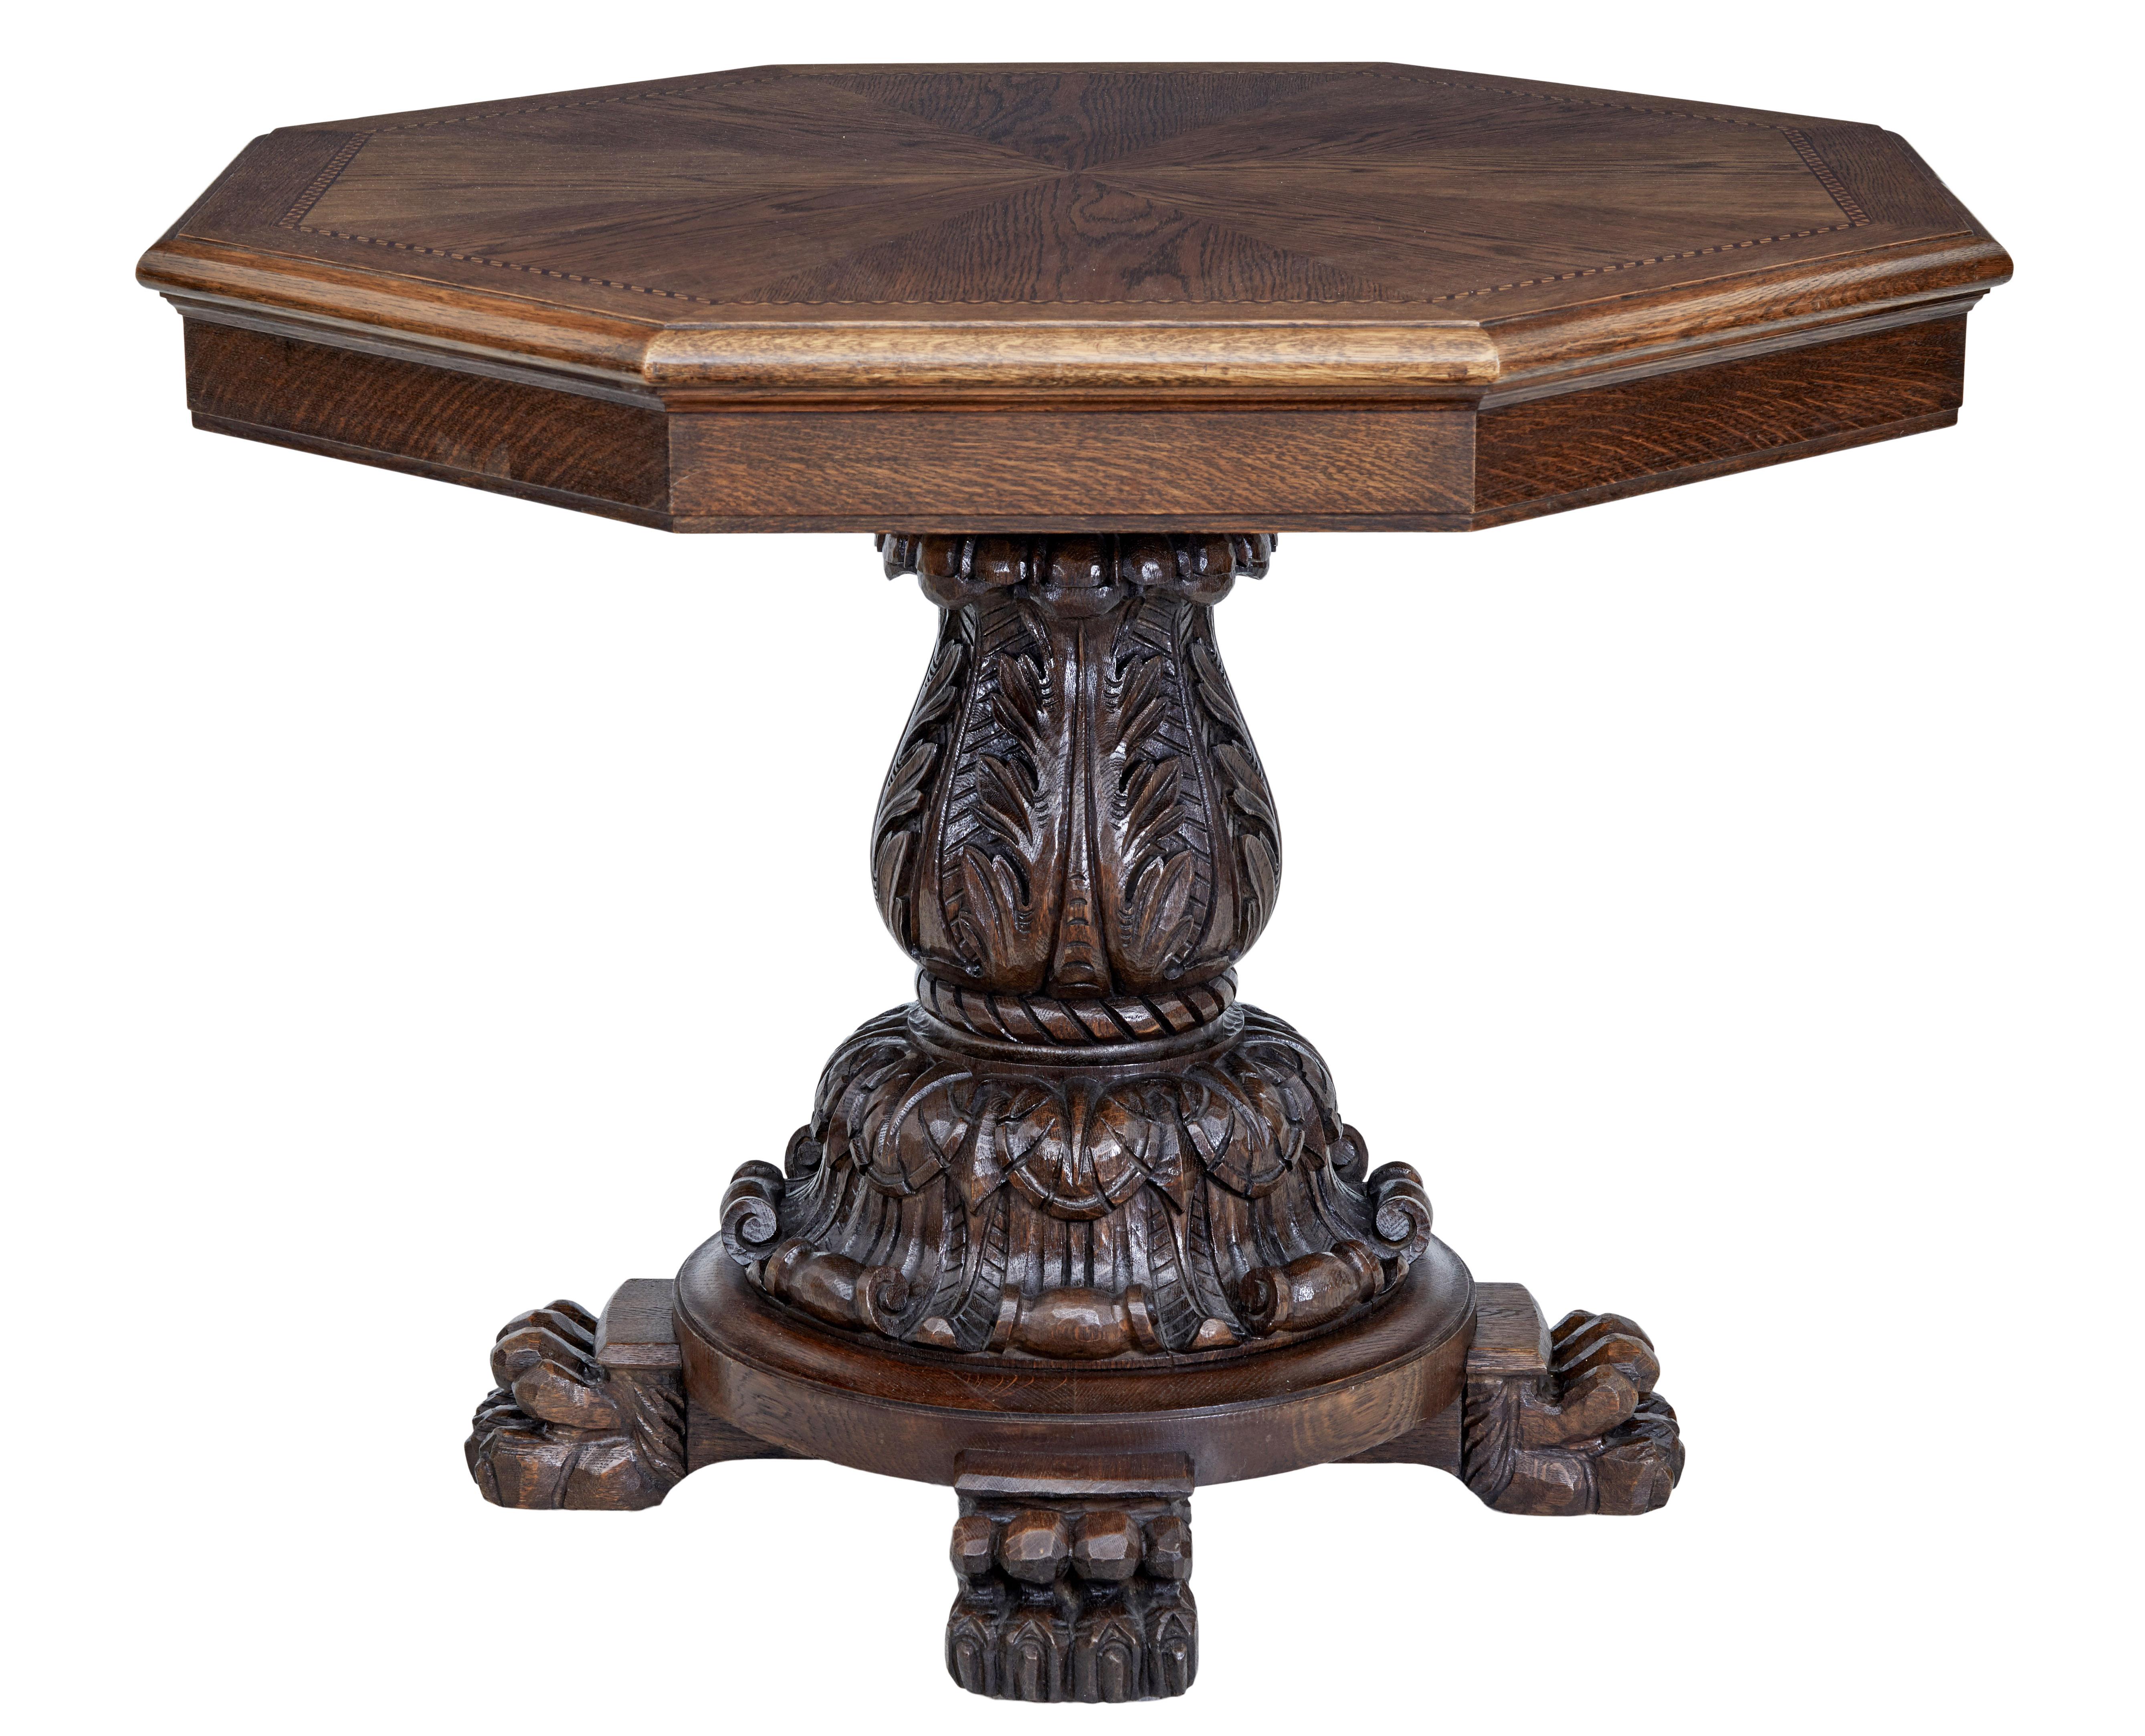 20th century baroque influenced oak center table circa 1930.

Octagonal top with segmented oak veneers, inlaid border of birch and mahogany and a further oak border. Supported by a heavily carved stem base with acanthus leaf